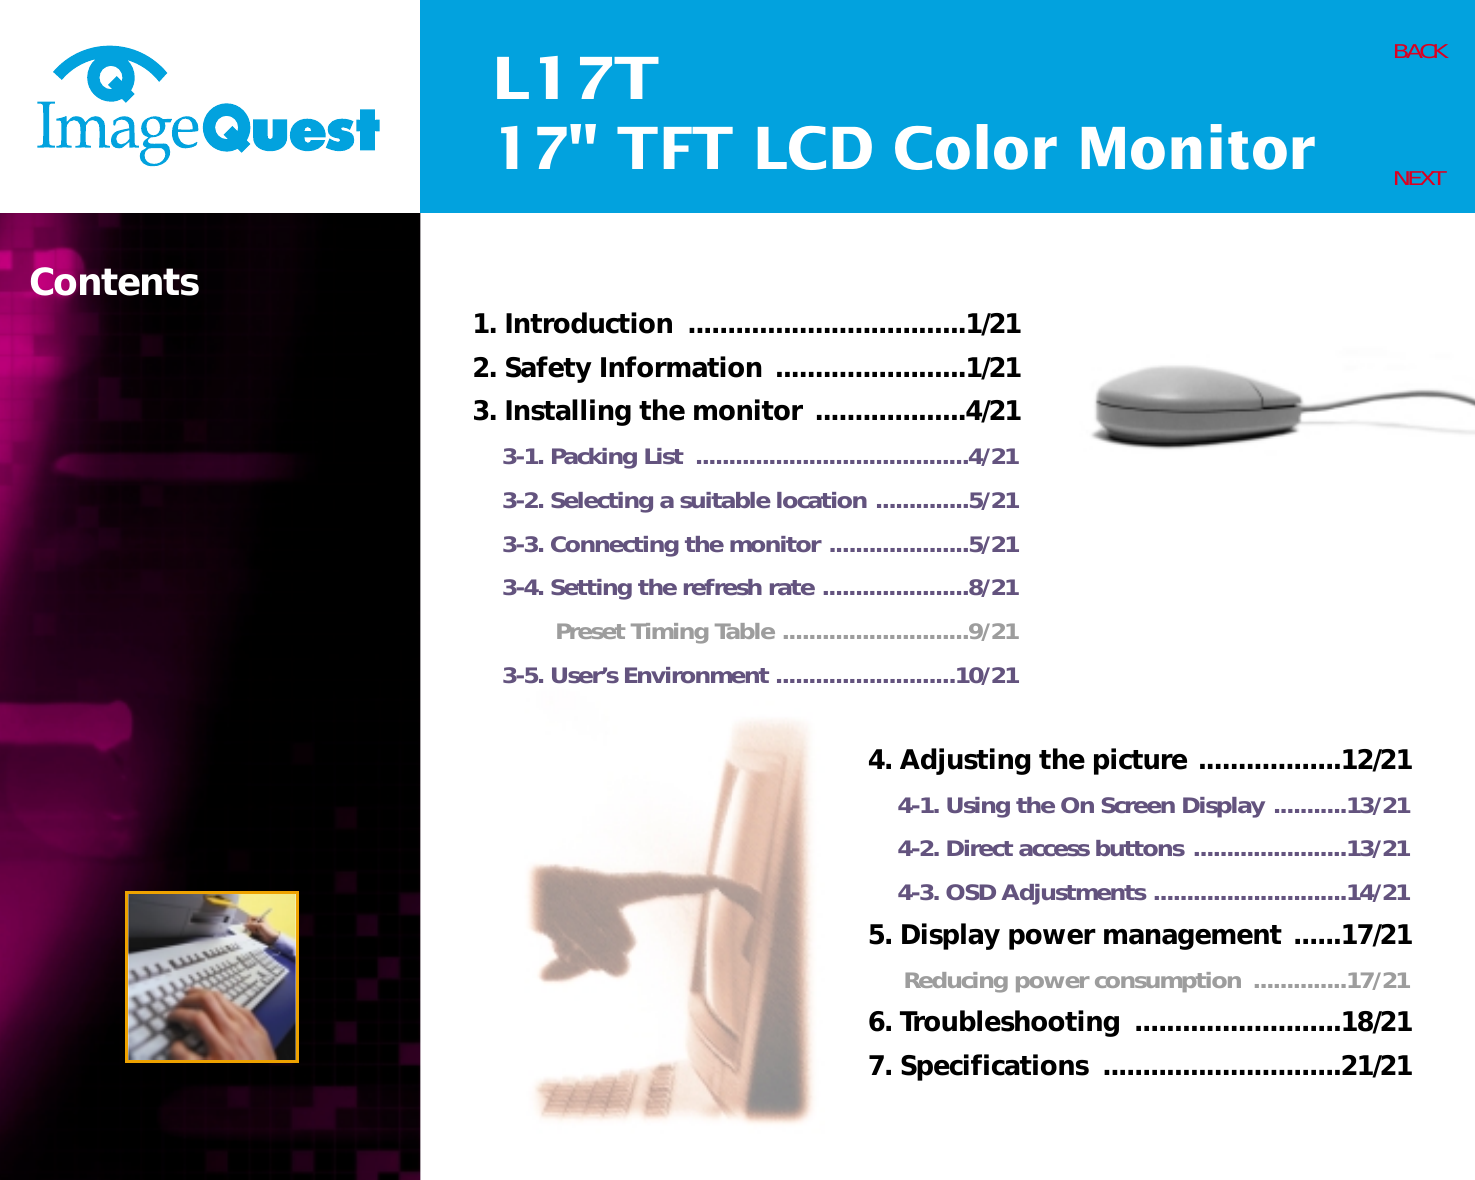 L17T17&quot; TFT LCD Color MonitorContents 1. Introduction  ...................................1/212. Safety Information ........................1/213. Installing the monitor ...................4/213-1. Packing List  .........................................4/213-2. Selecting a suitable location ..............5/213-3. Connecting the monitor .....................5/213-4. Setting the refresh rate ......................8/21Preset Timing Table ............................9/213-5. User’s Environment ...........................10/21BACKNEXT4. Adjusting the picture ..................12/214-1. Using the On Screen Display ...........13/214-2. Direct access buttons .......................13/214-3. OSD Adjustments .............................14/215. Display power management ......17/21Reducing power consumption  ..............17/216. Troubleshooting  ..........................18/217. Specifications  ..............................21/21